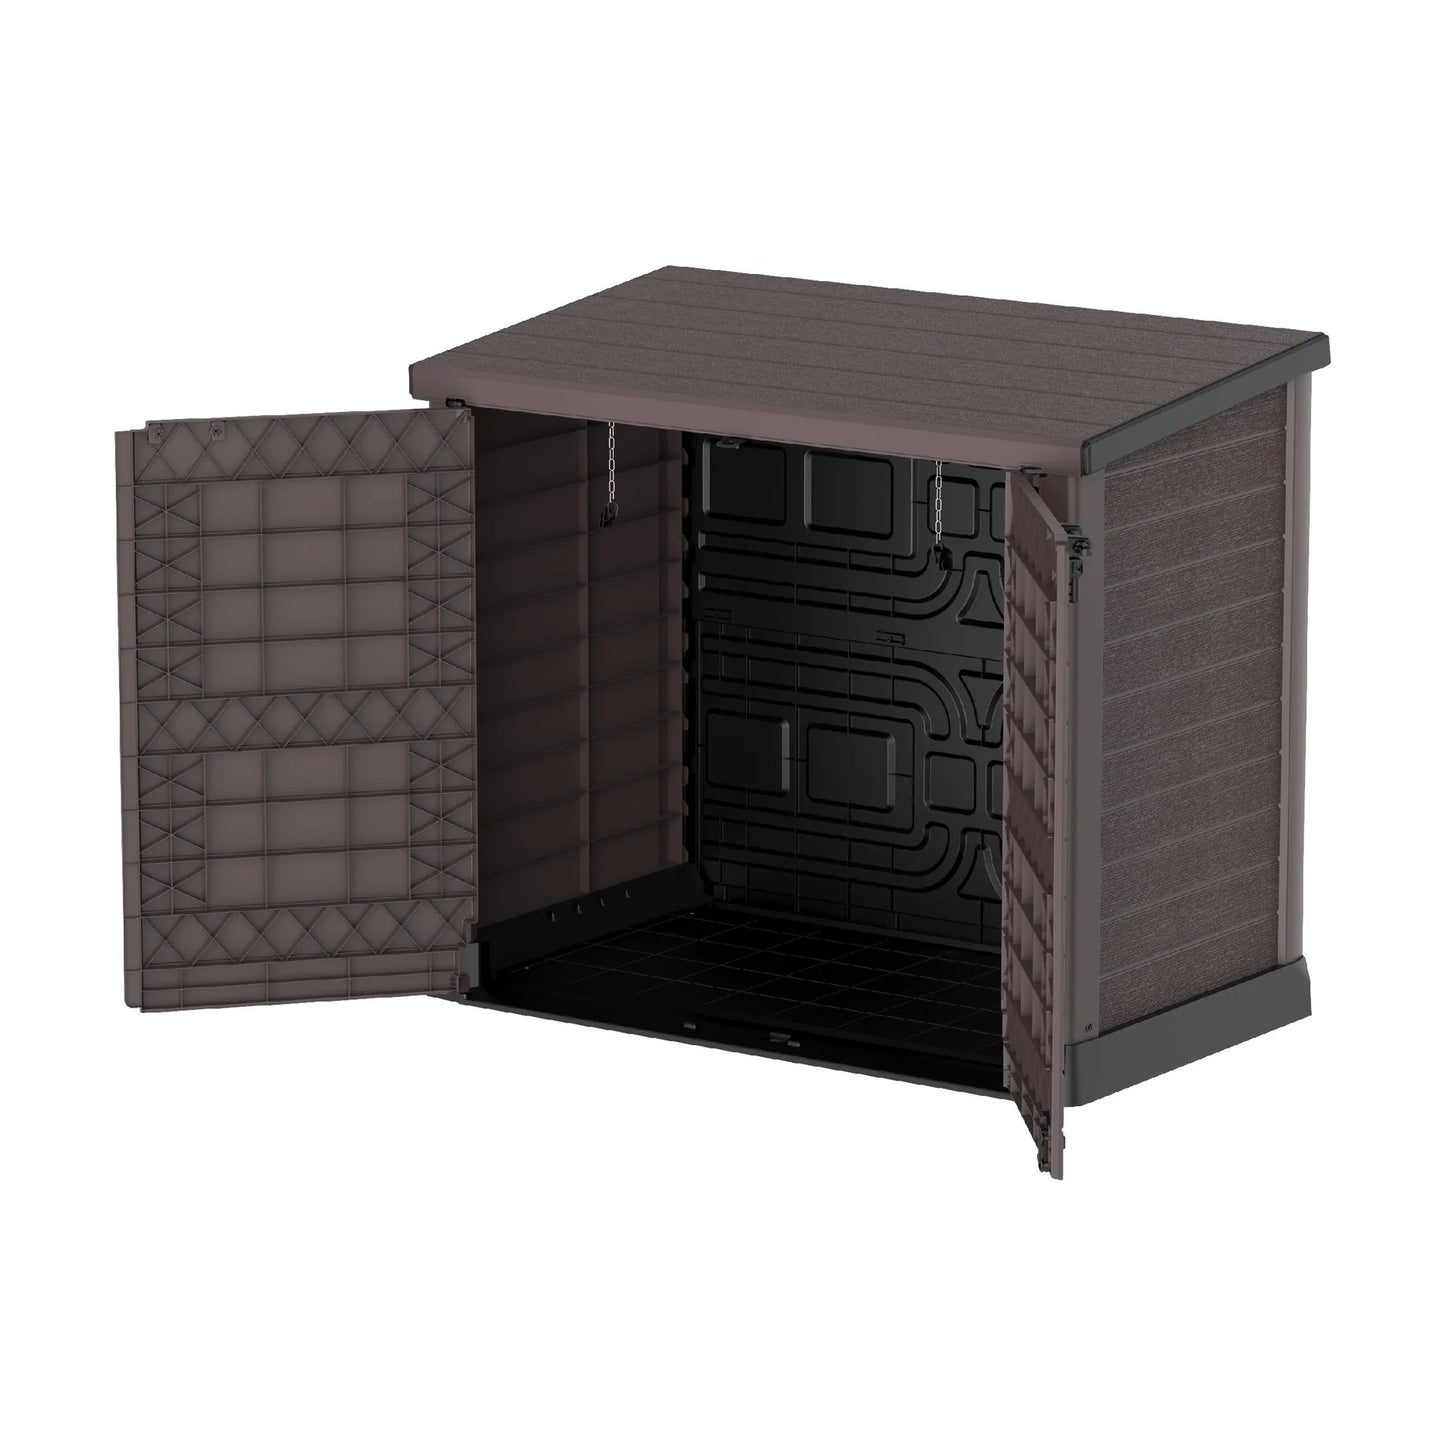 CEDARGRAIN 1200L SMALL STORAGE SHED WITH FLAT LID